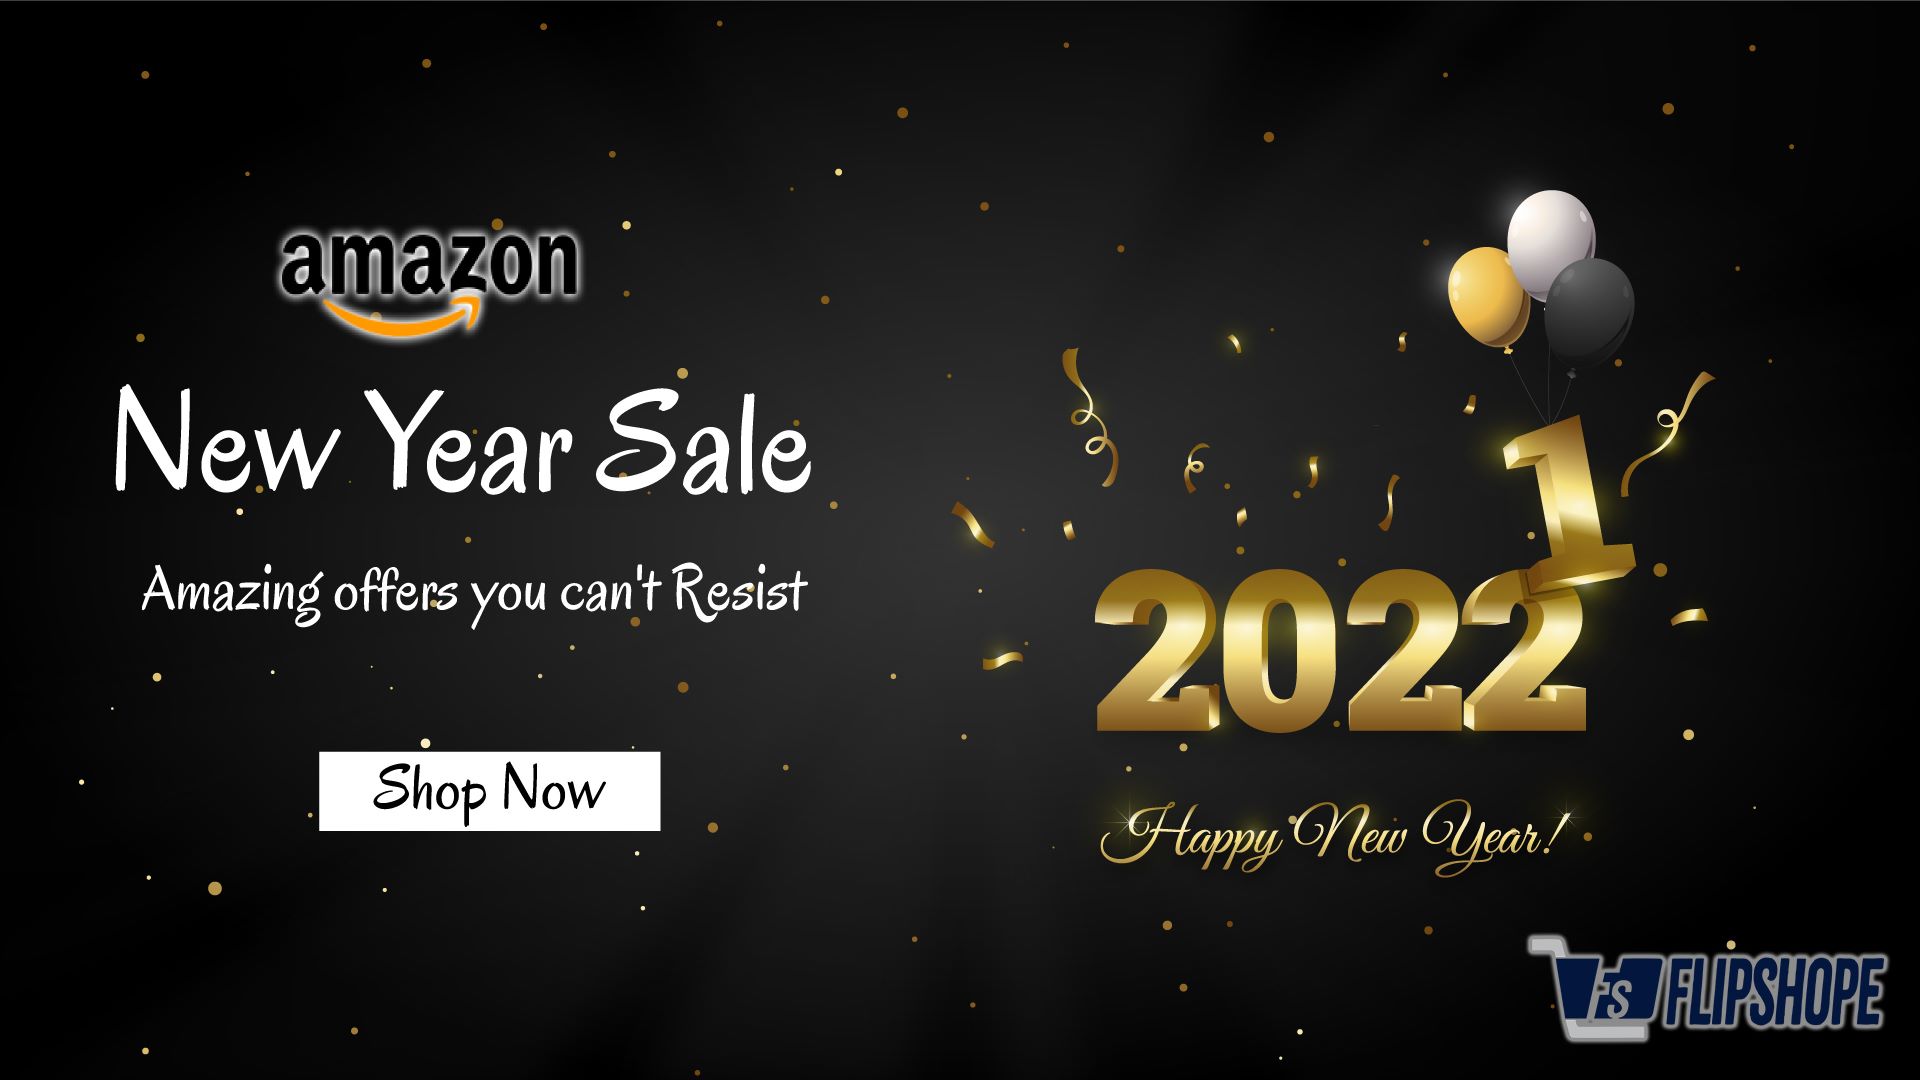 Amazon New Year Sale Dates, Offers Deals and More